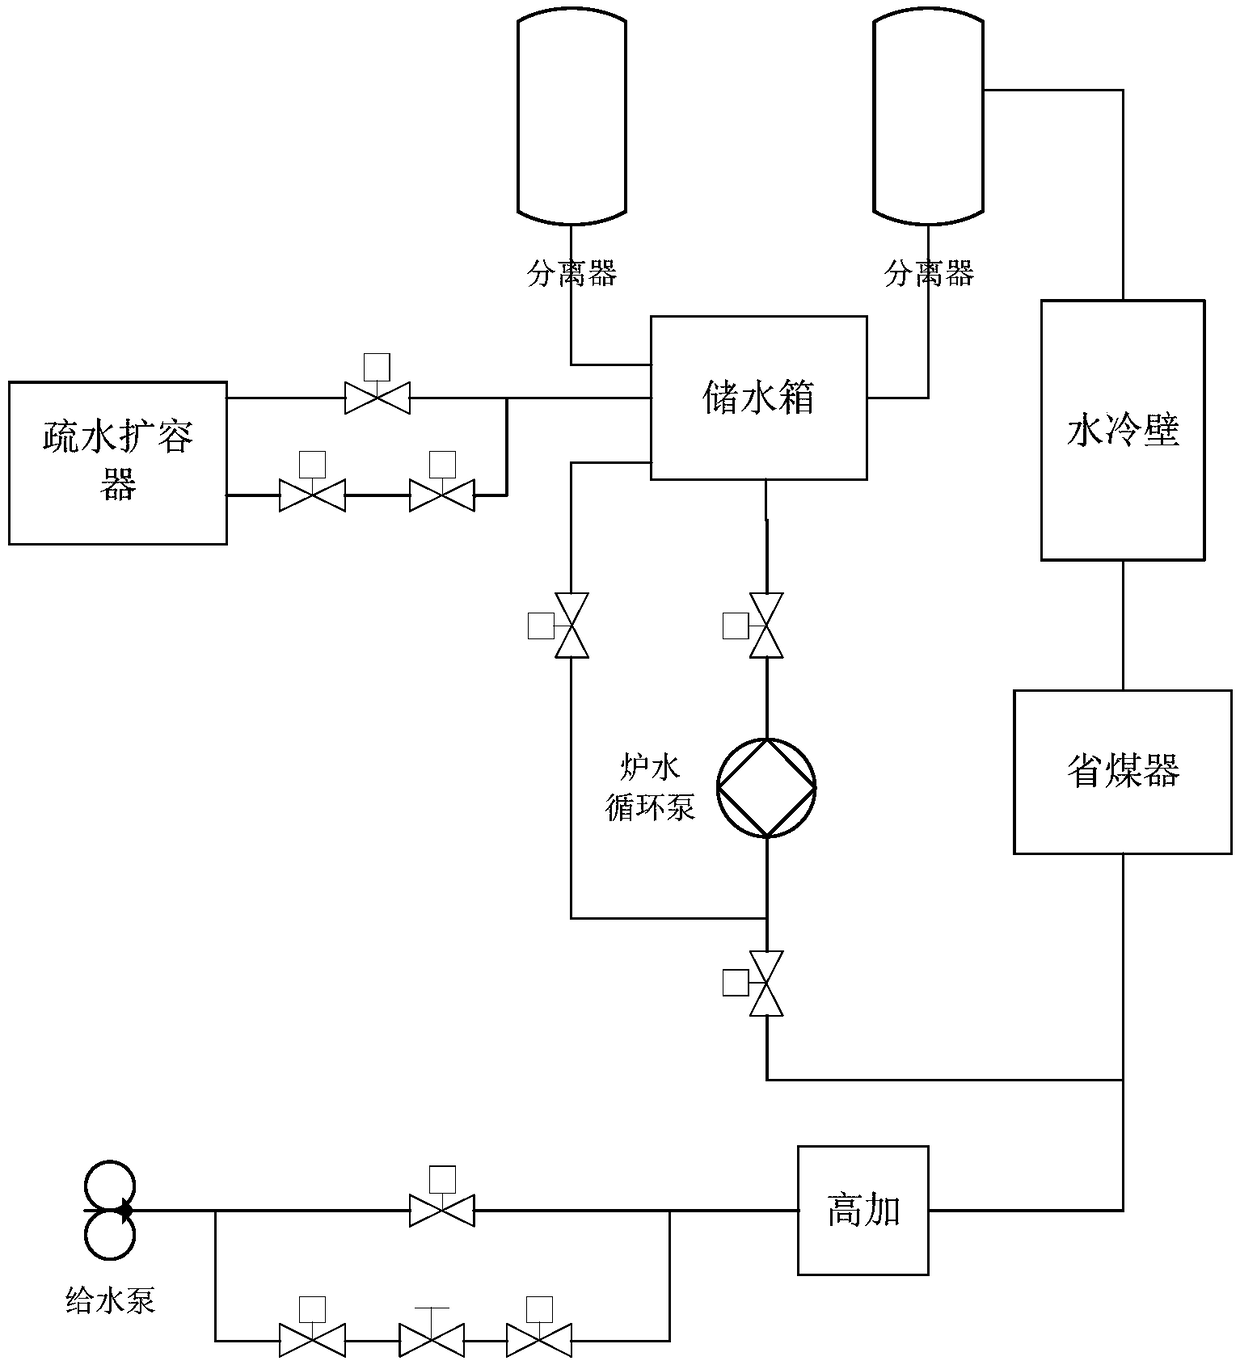 Automatic control method for transformation process of supercritical or ultra-supercritical unit from hygrometric state to dry state